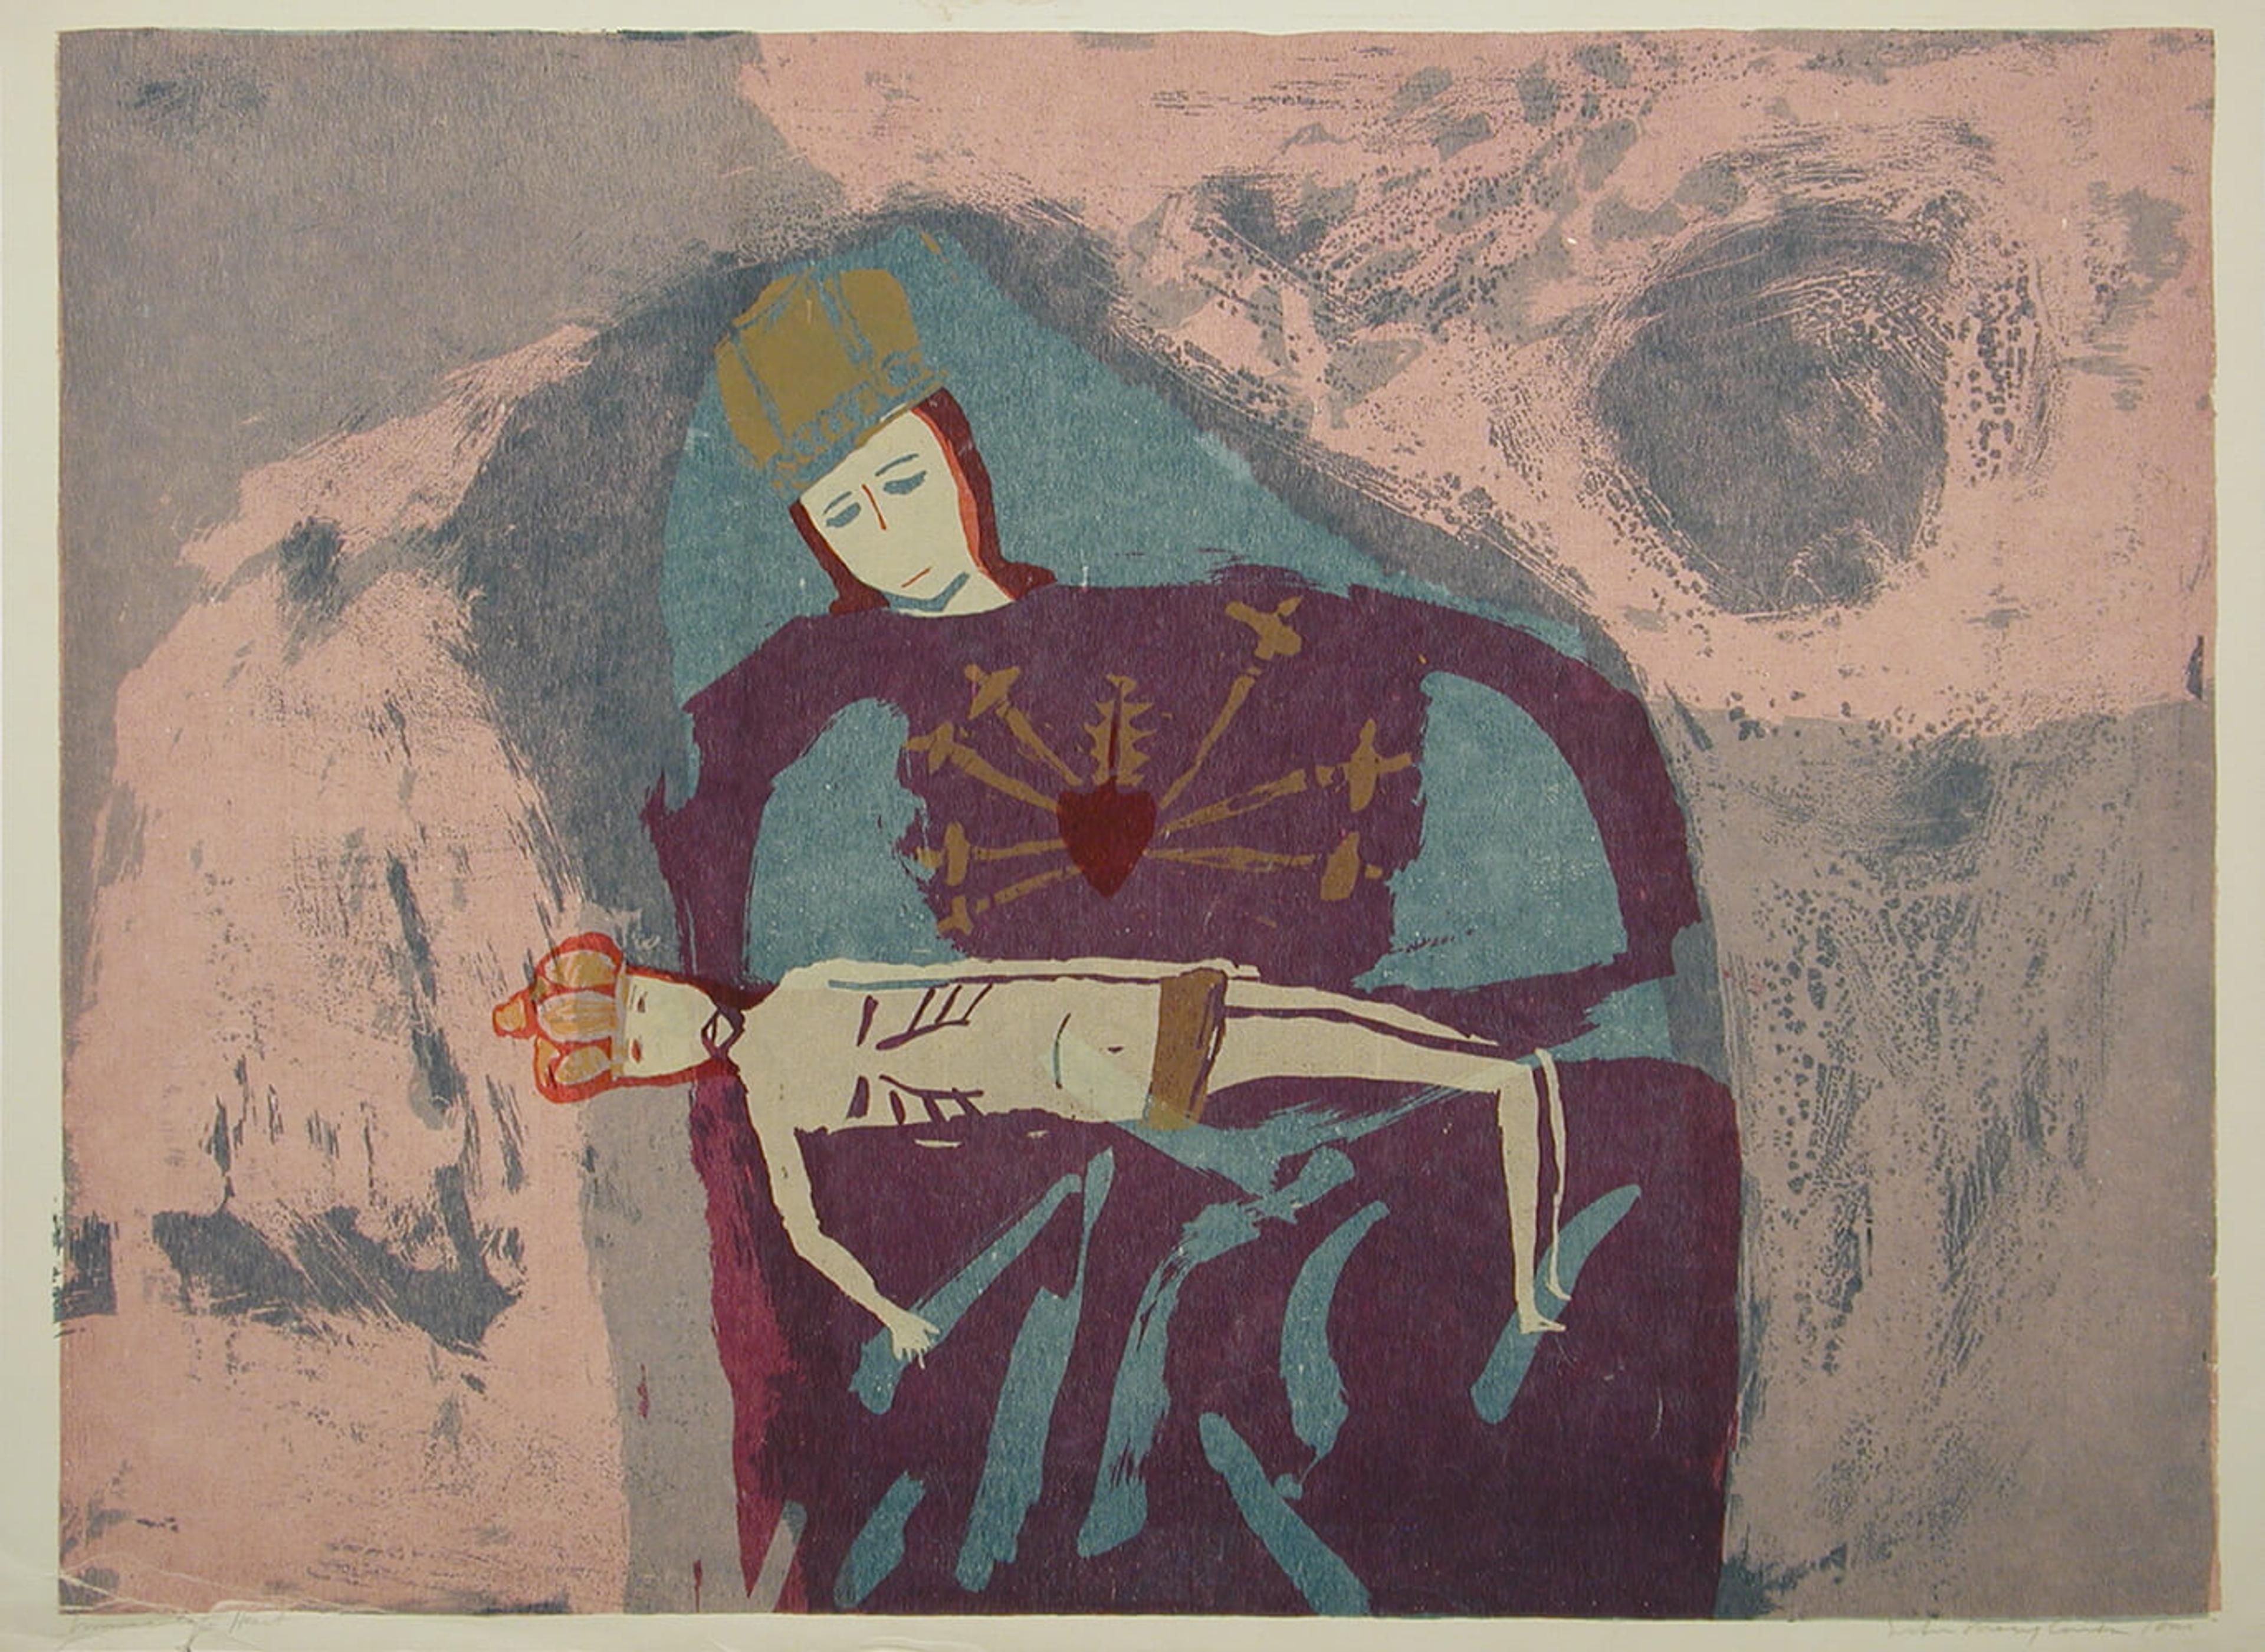 Bold and expressive print of Mother Mary looking over a deceased Jesus Christ